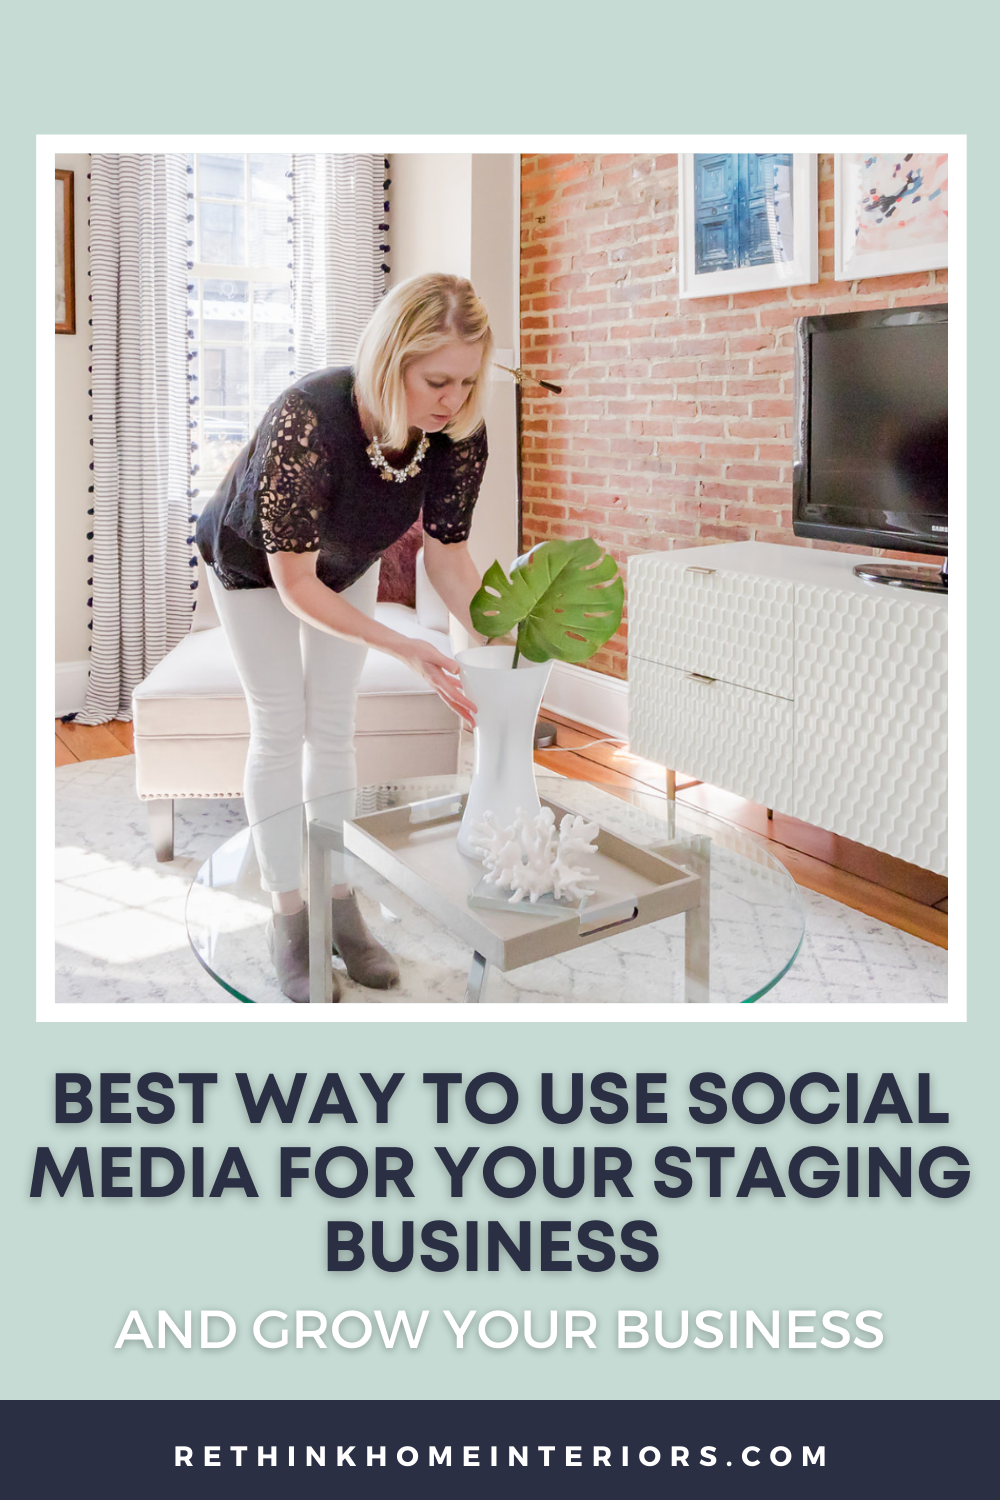 Best way to use social media for your staging business and grow your business